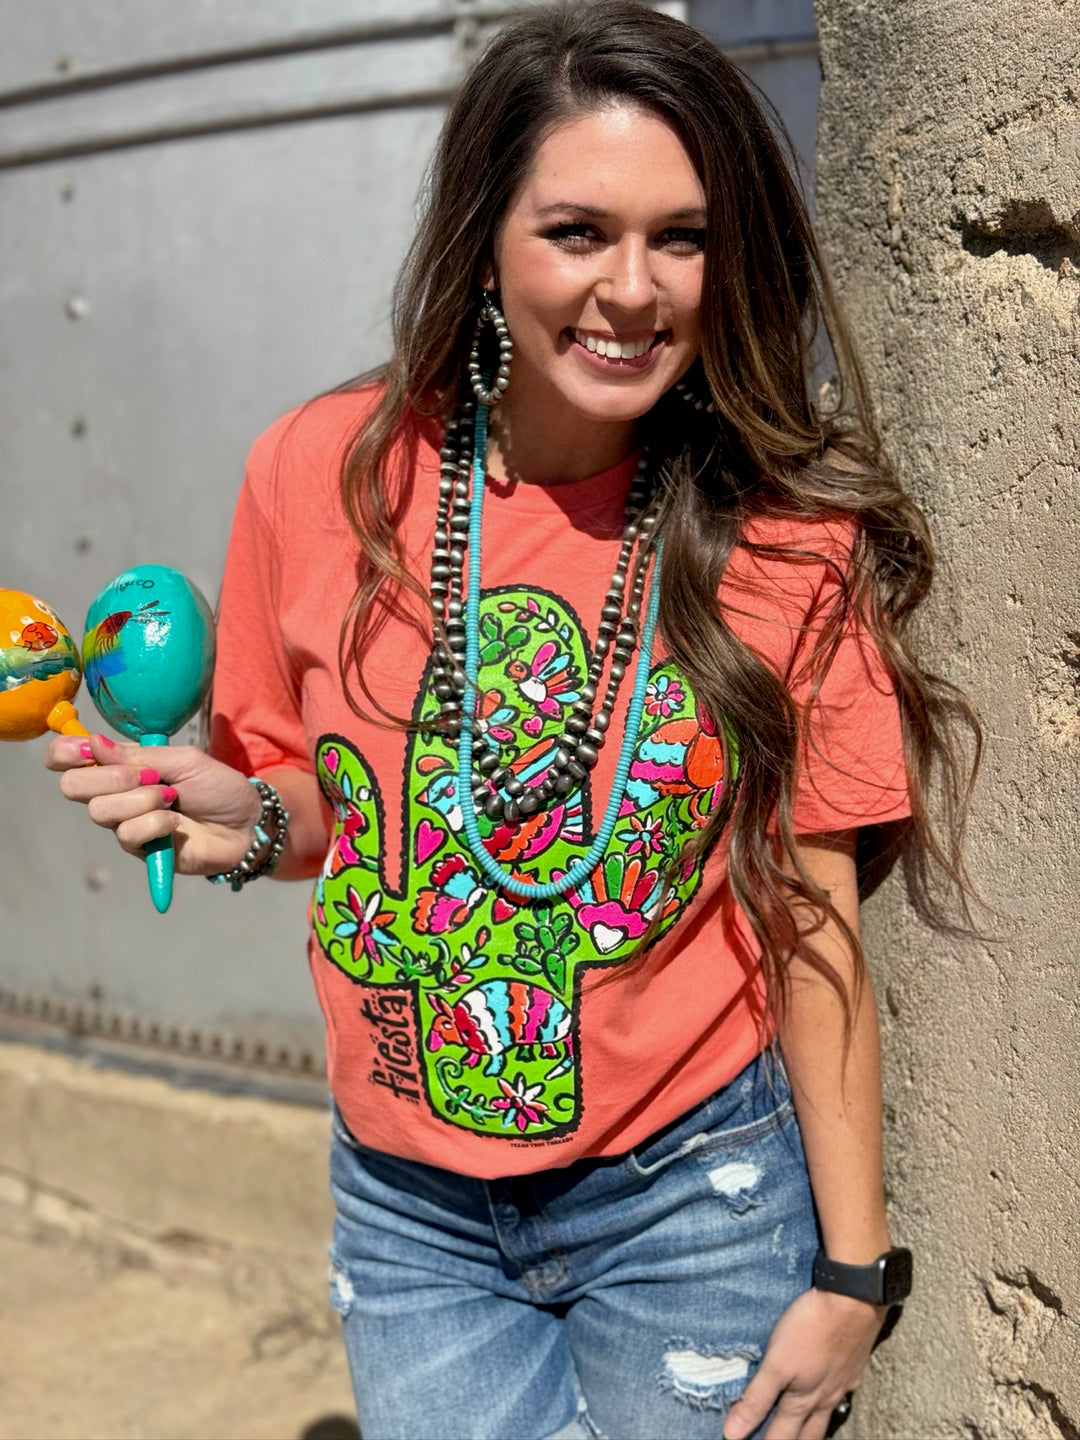 Barb's Fiesta Cactus Graphic Tee by Texas True Threads